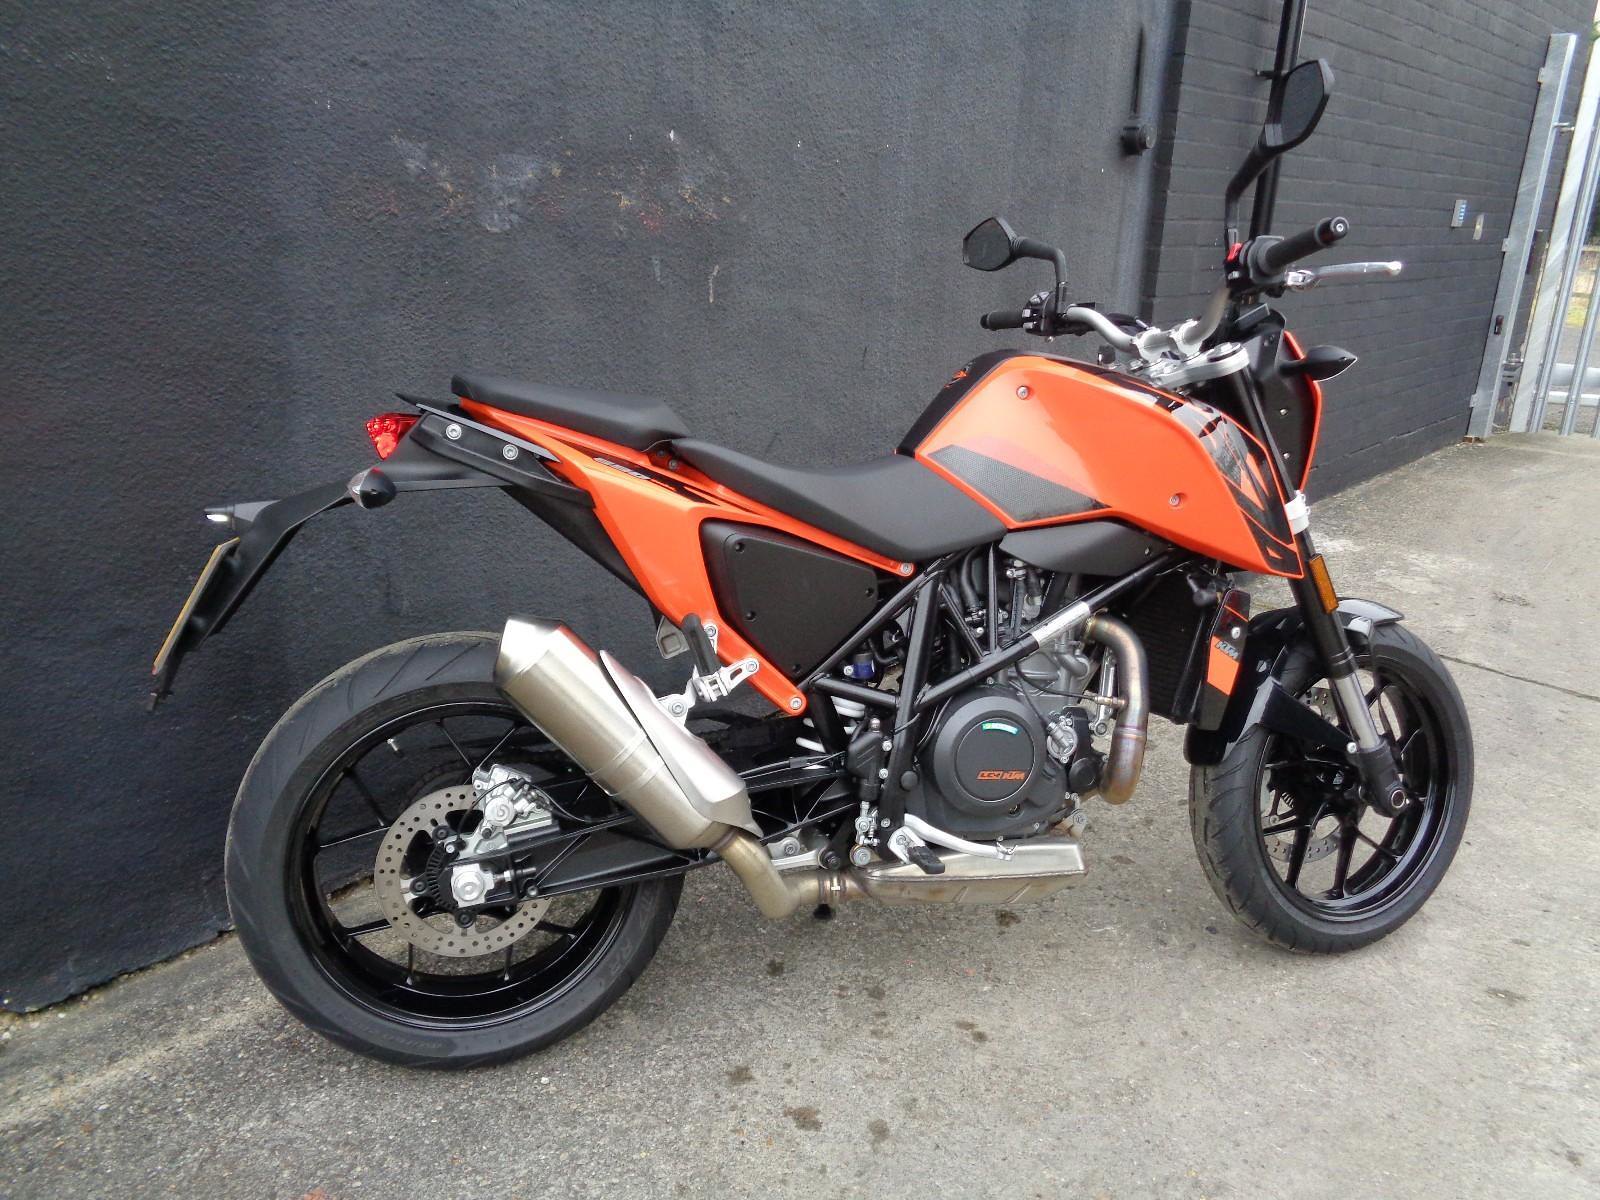 The 690 is sold.... i bought a new bike... it's a 690 ) KTM Forums